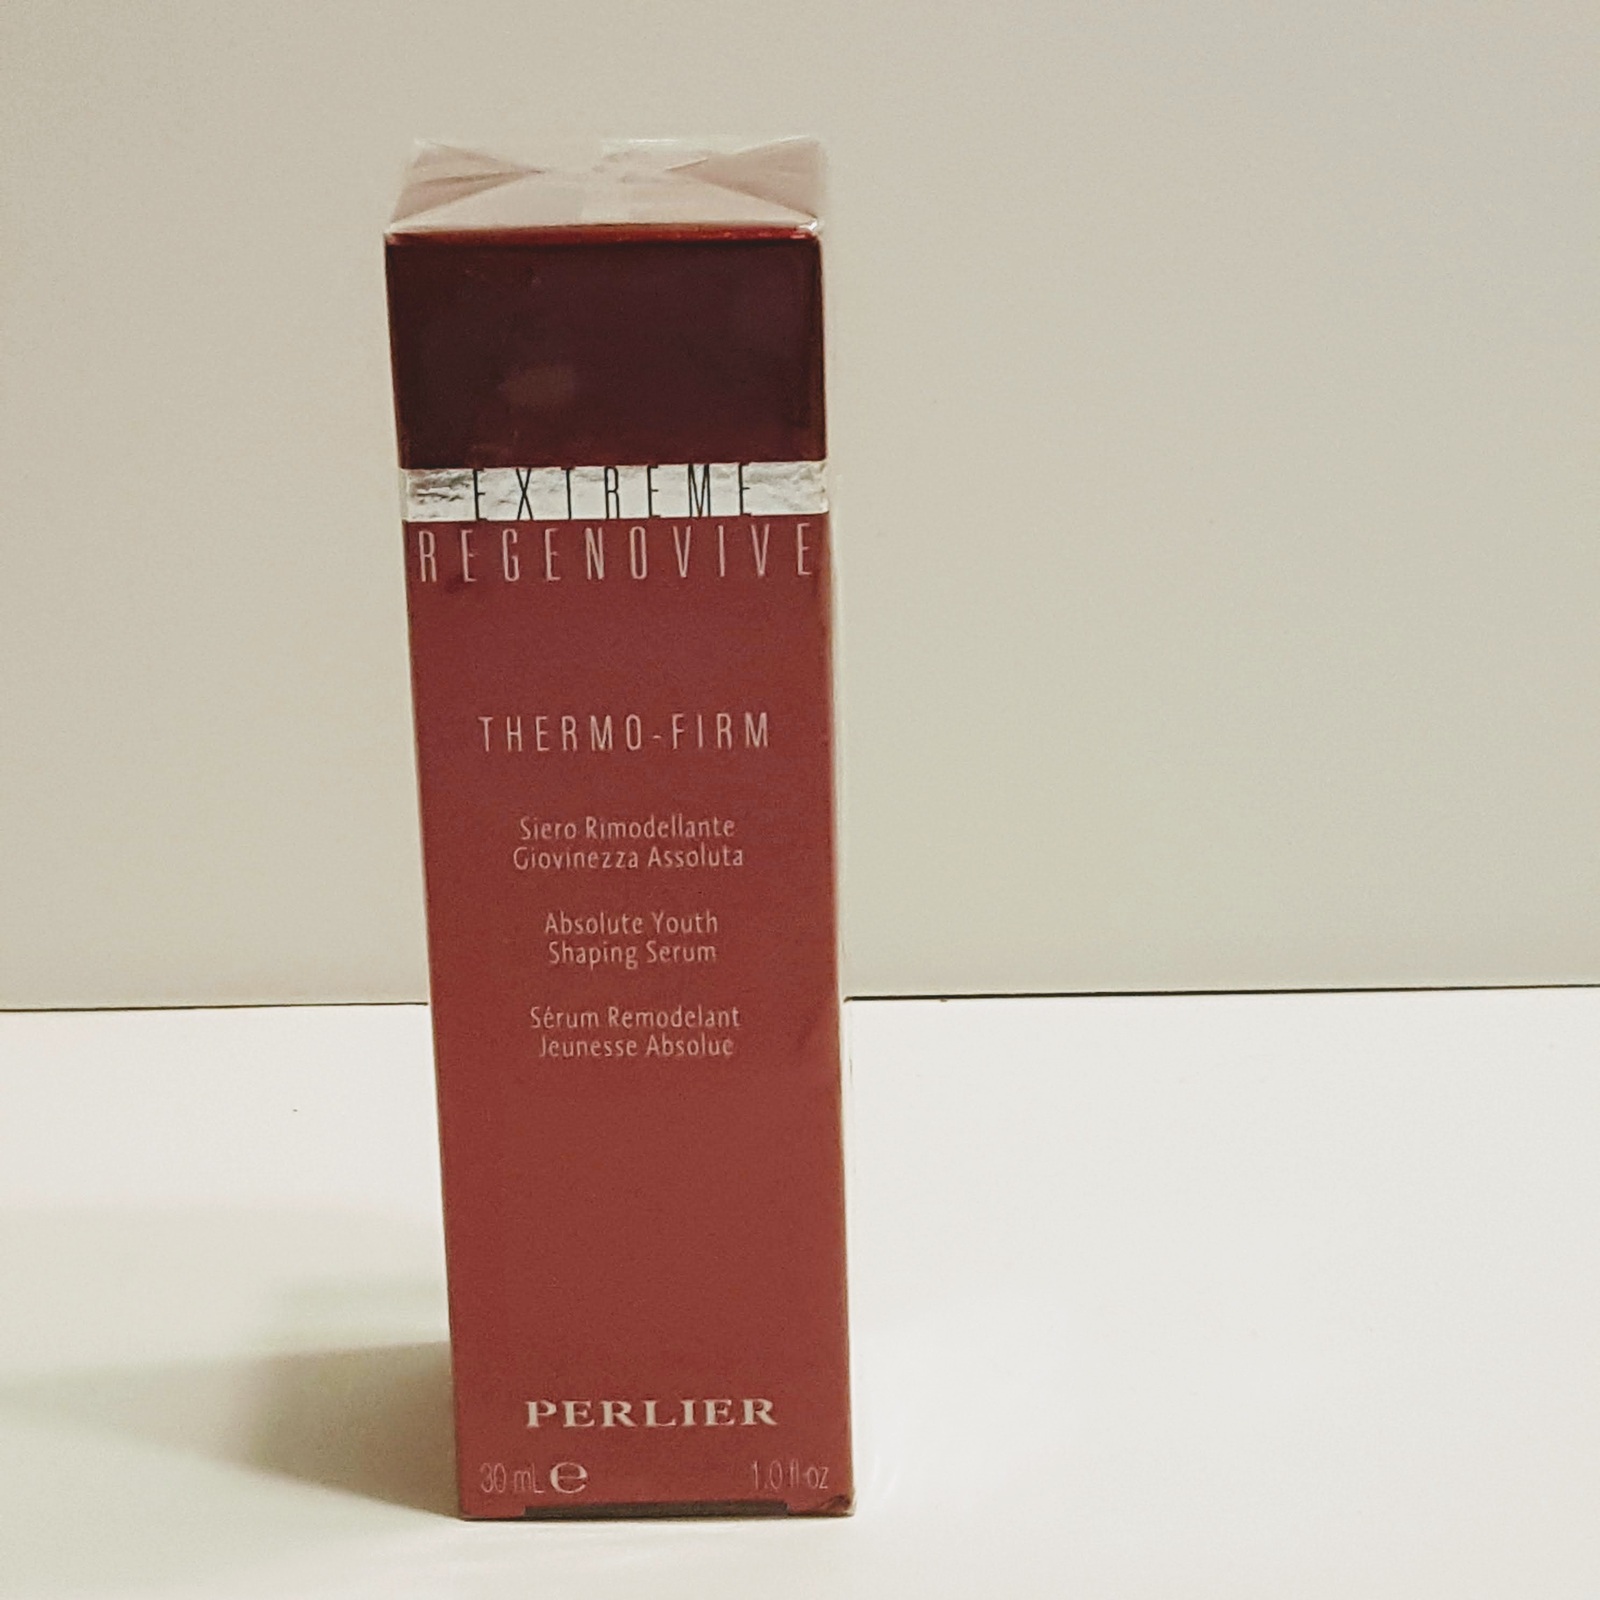  Sealed Perlier 1 oz Extreme Regenovive Thermo Firm Absolute Youth Serum - $17.00